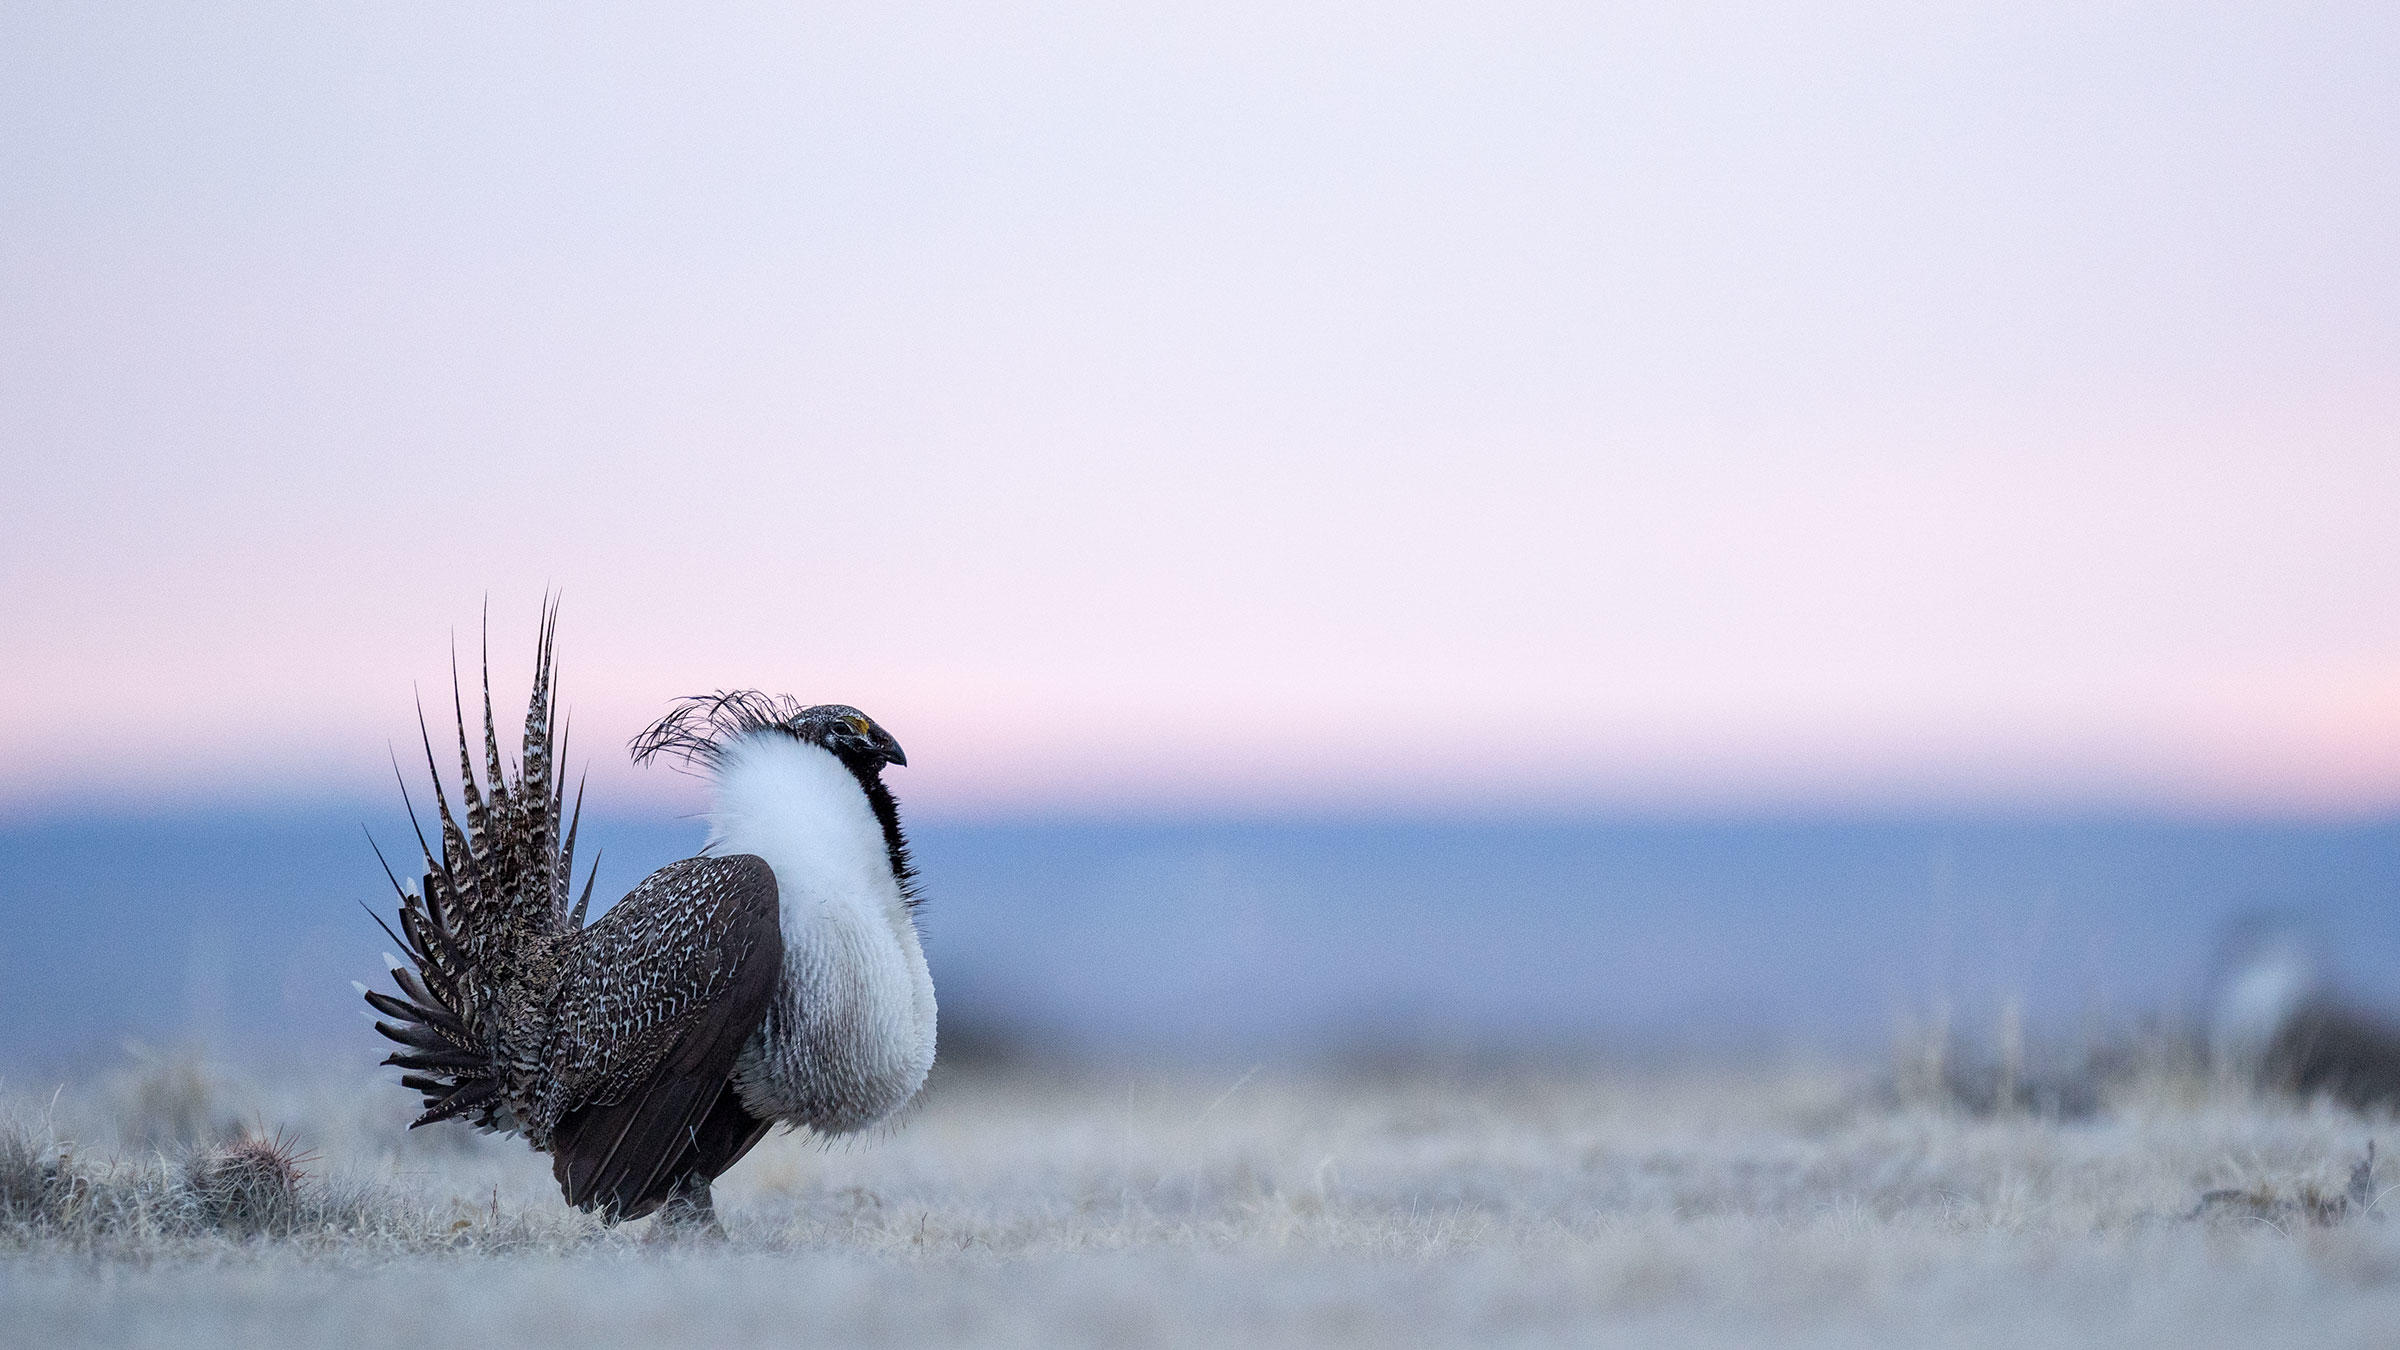 Greater Sage-Grouse lekking on BLM land managed by Pathfinder Ranches in Natrona County, Wyoming.